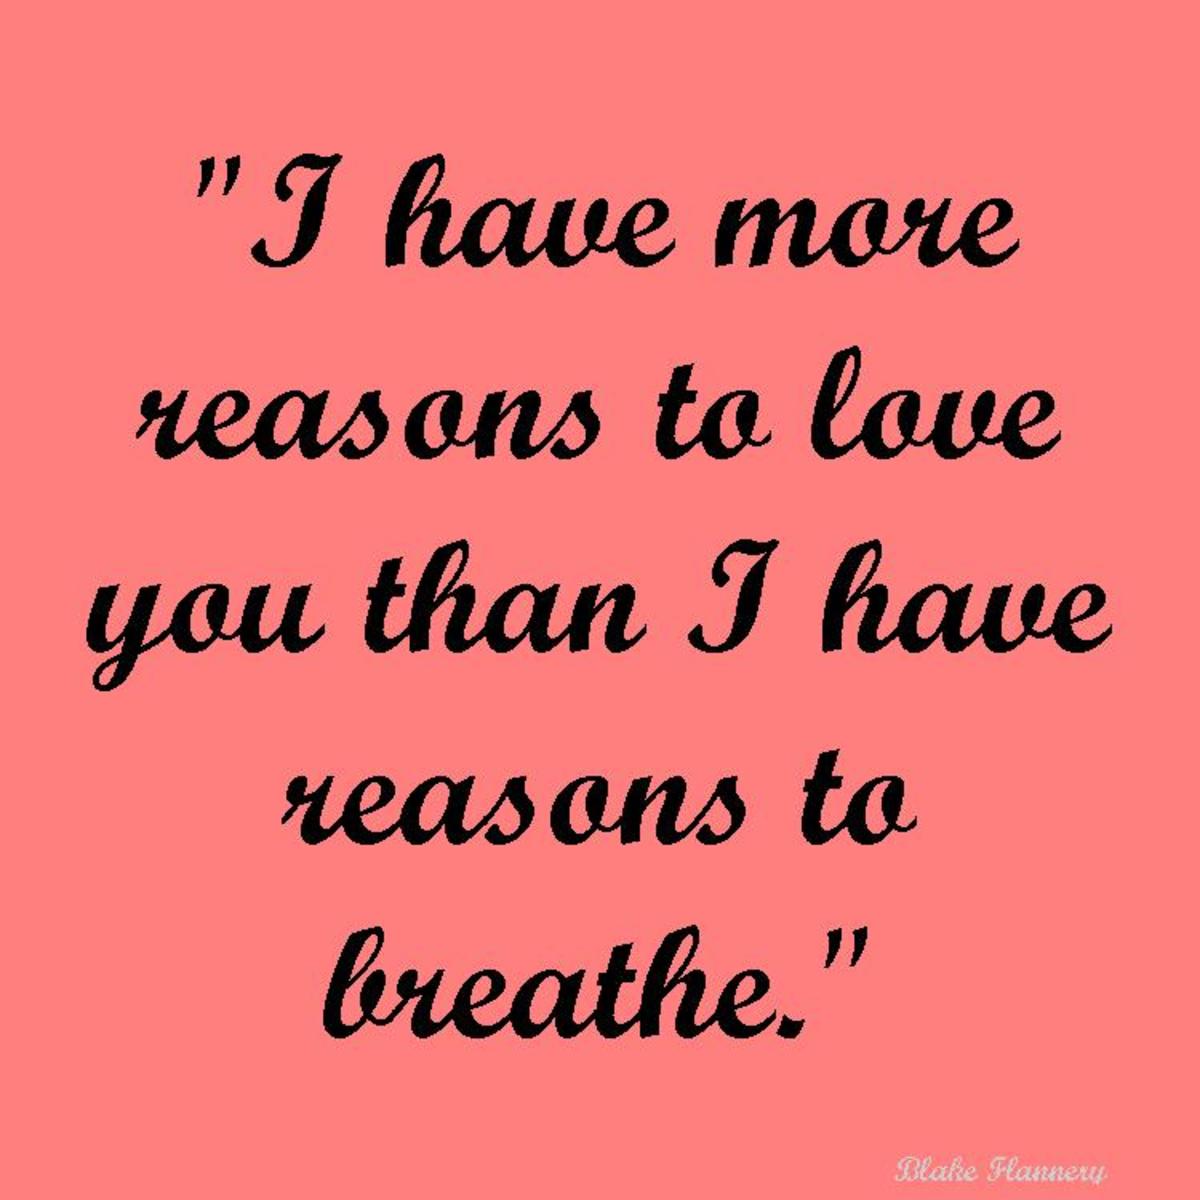 Example Love Messages and Romantic Quotes for a Partner | Holidappy